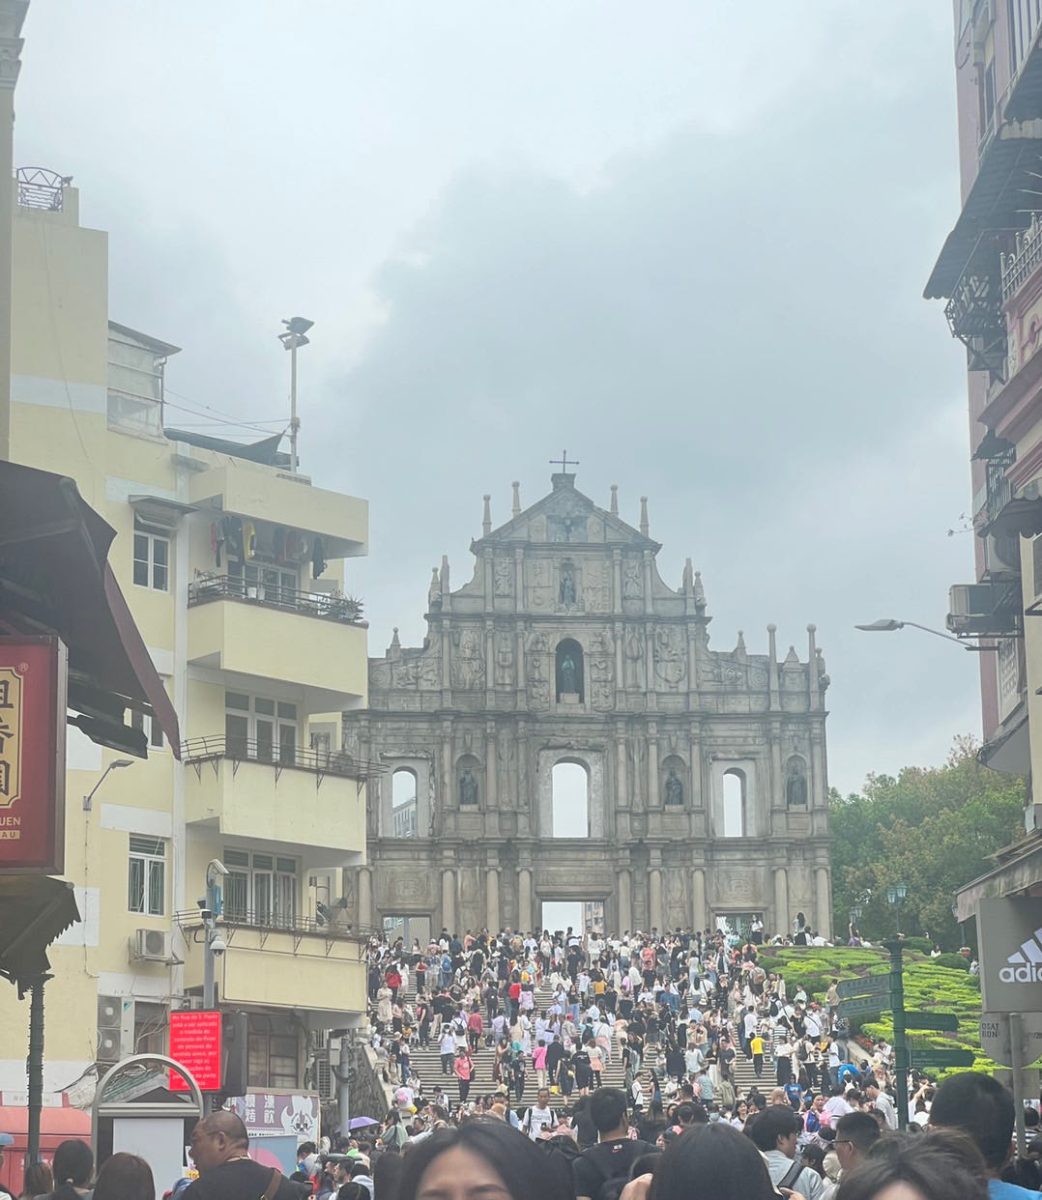 Ruins+of+St.+Pauls%2C+a+famous+attraction+in+Macau+during+the+Labor+Day+holiday.+Crowd+control+was+in+place+at+the+attraction+due+to+the+number+of+tourists+from+mainland+China+in+May+1